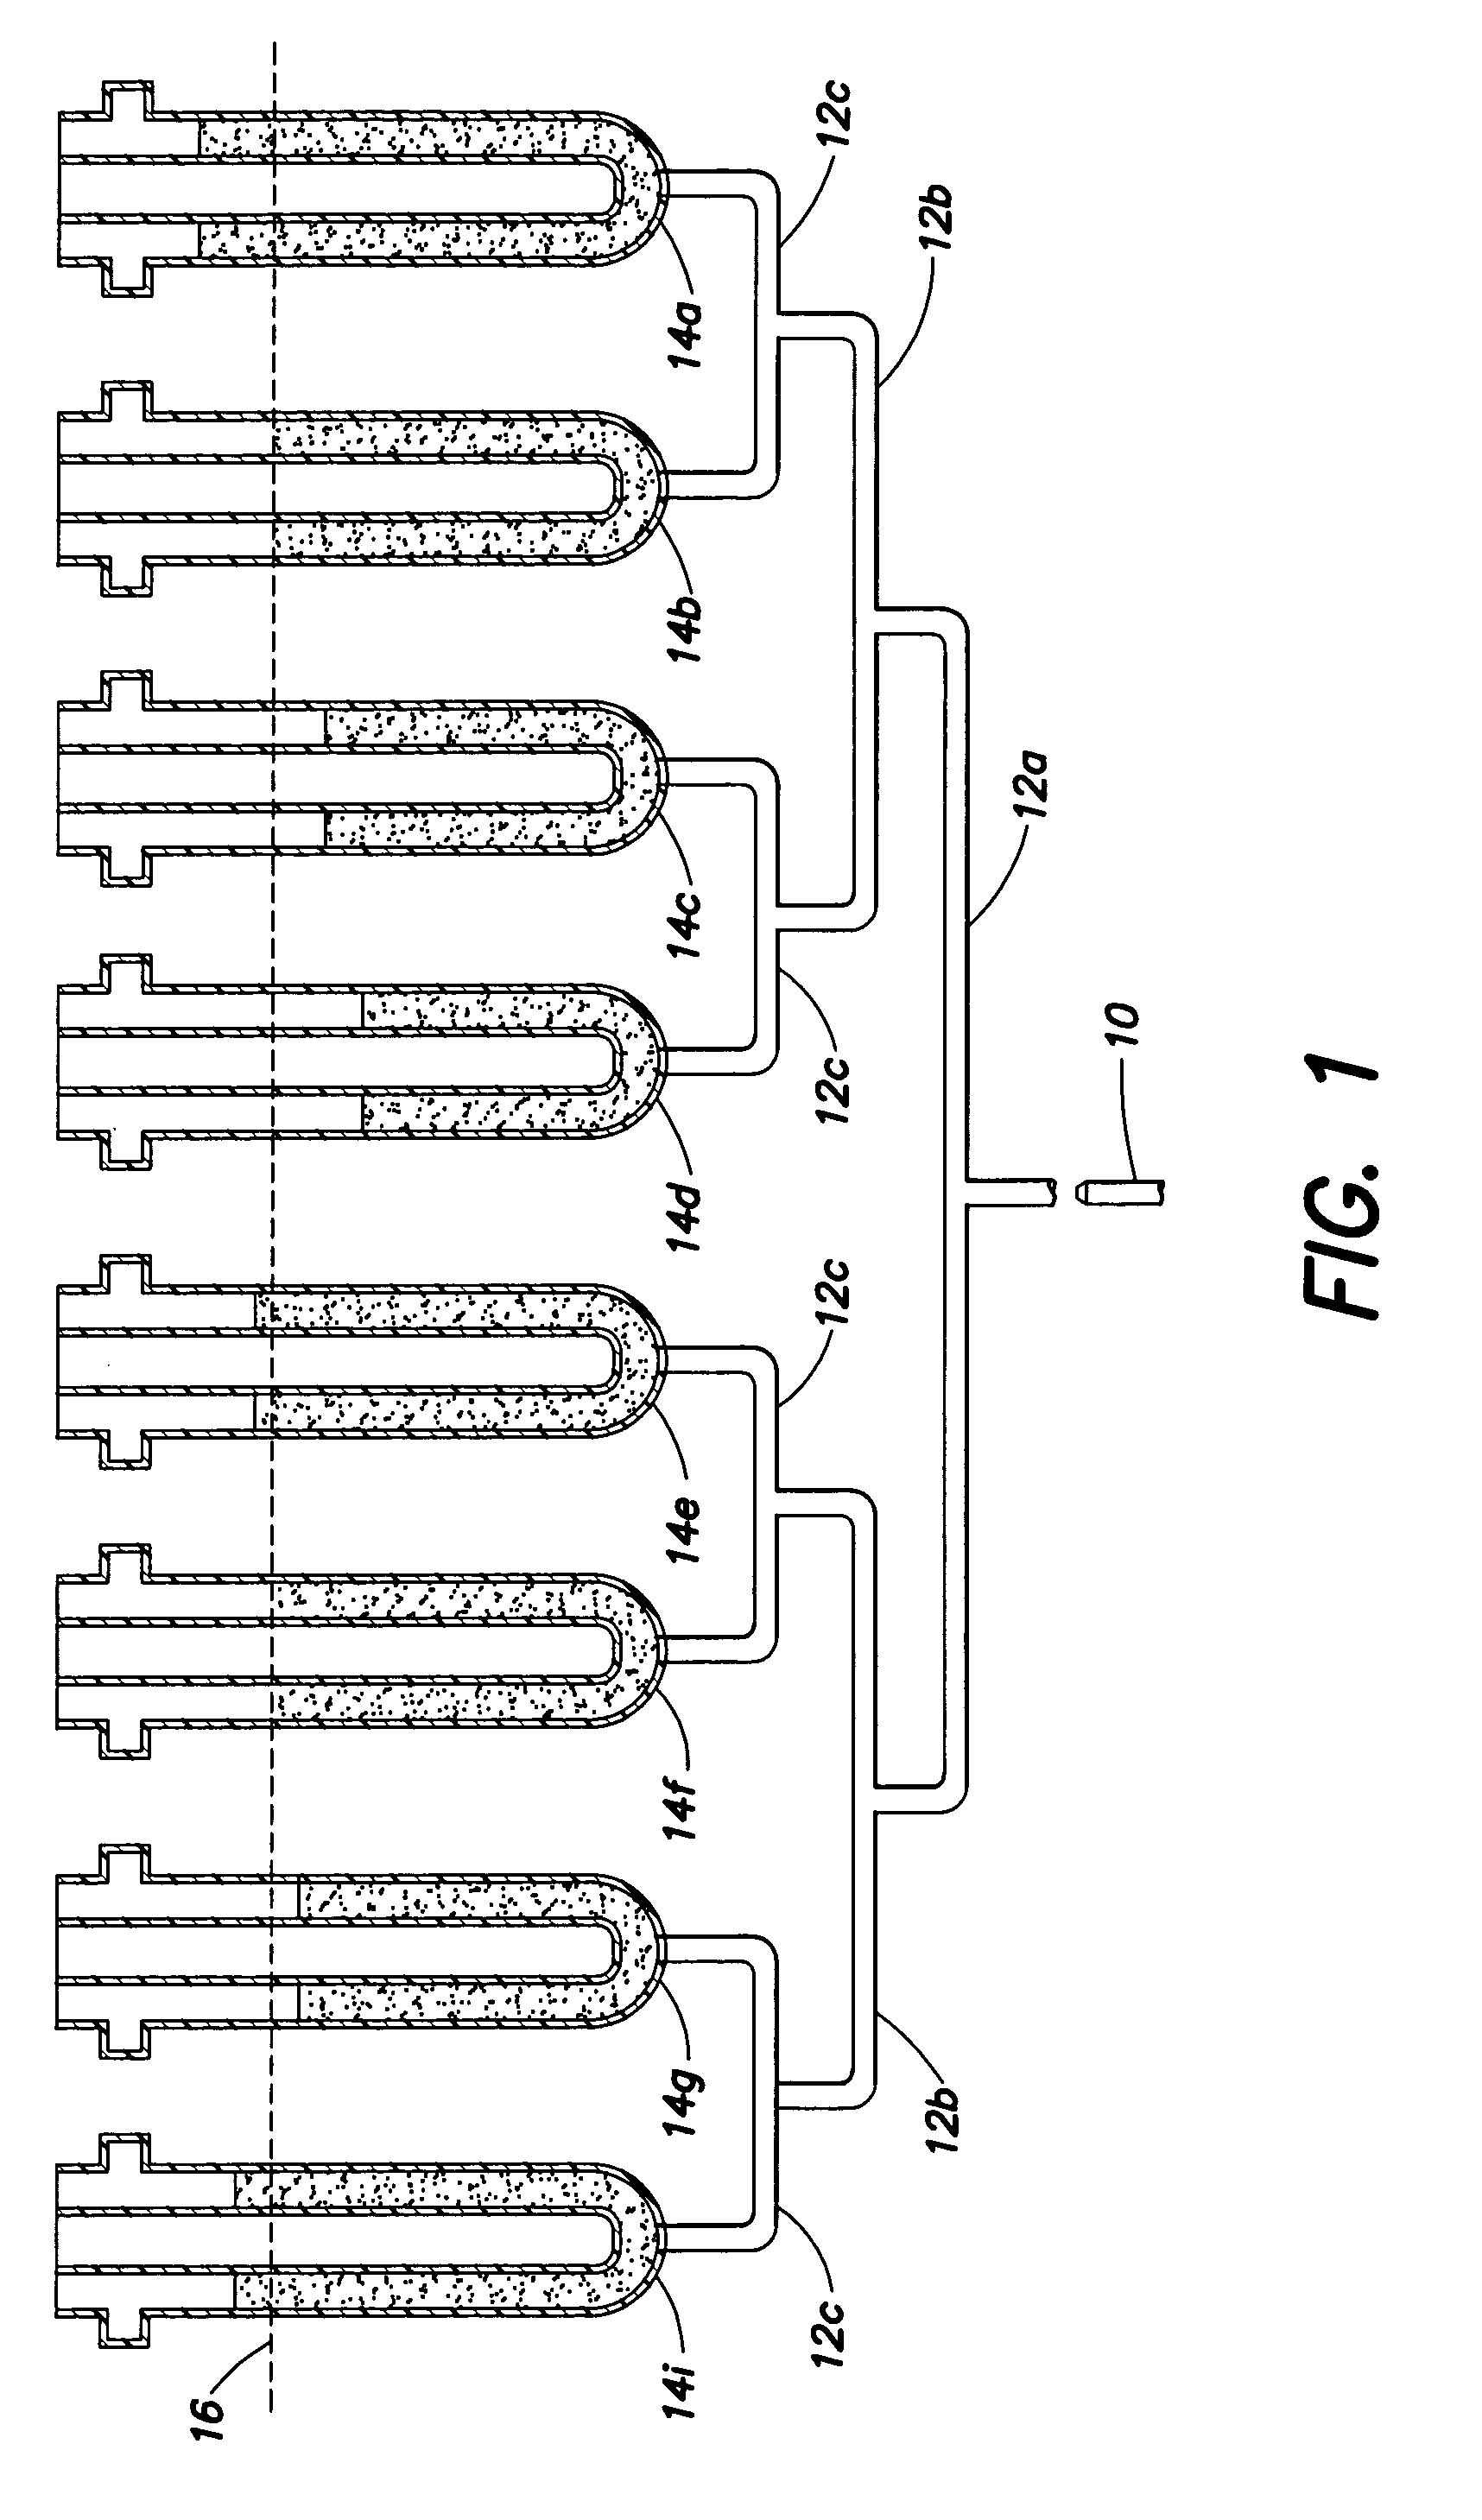 Controlling delivery of polymer material in a sequential injection molding process